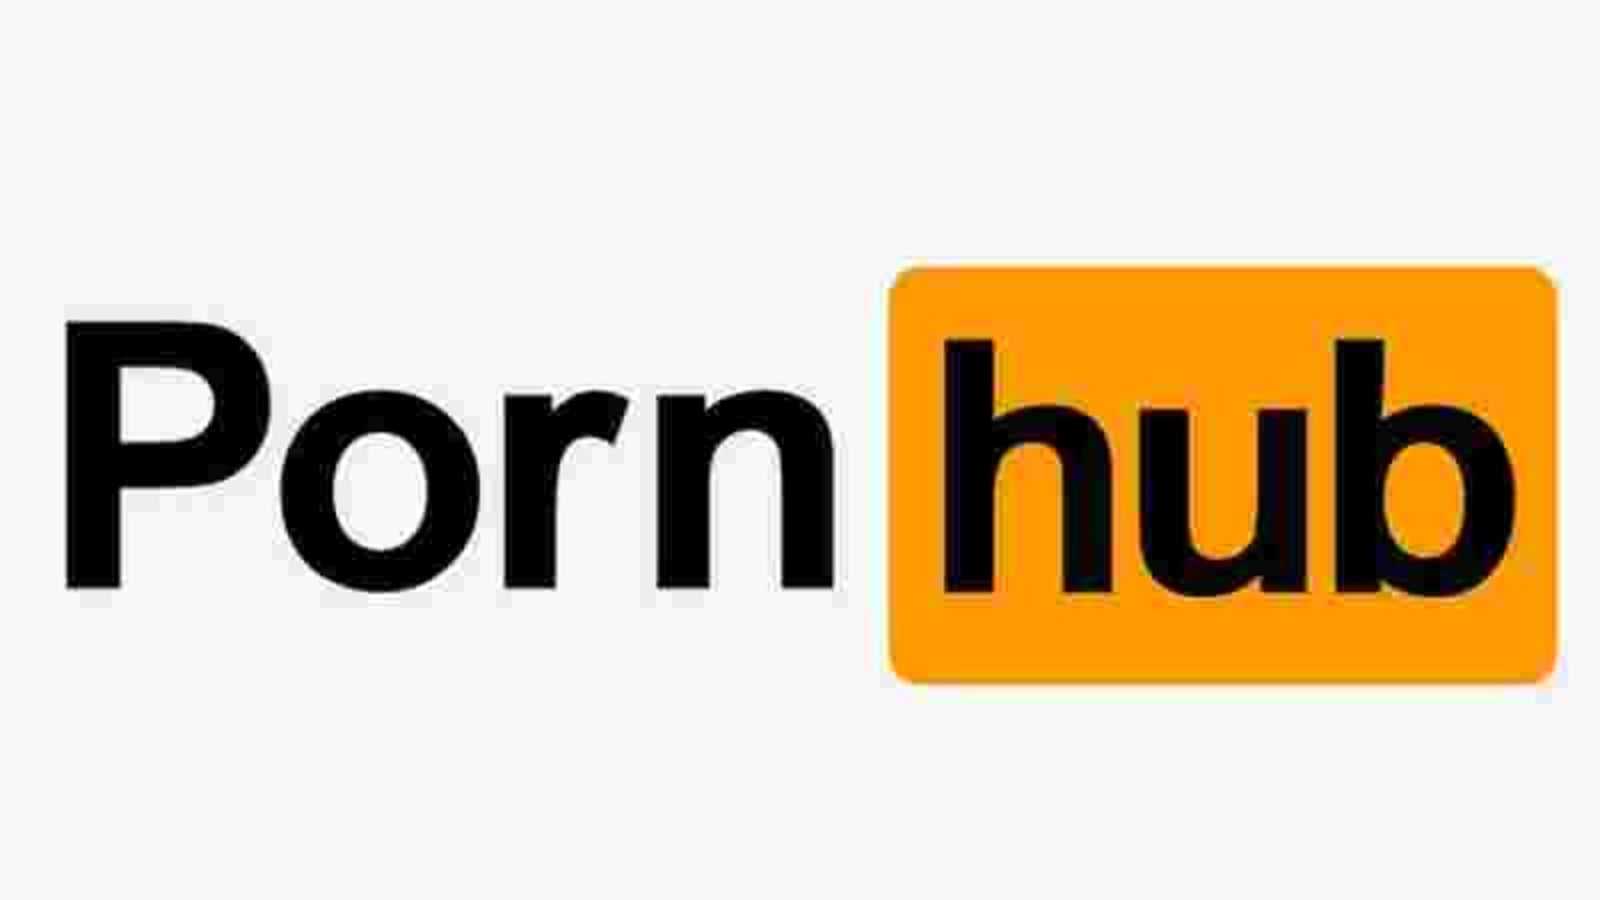 Pornhub is now only accepting cryptocurrency for its premium service Tech News